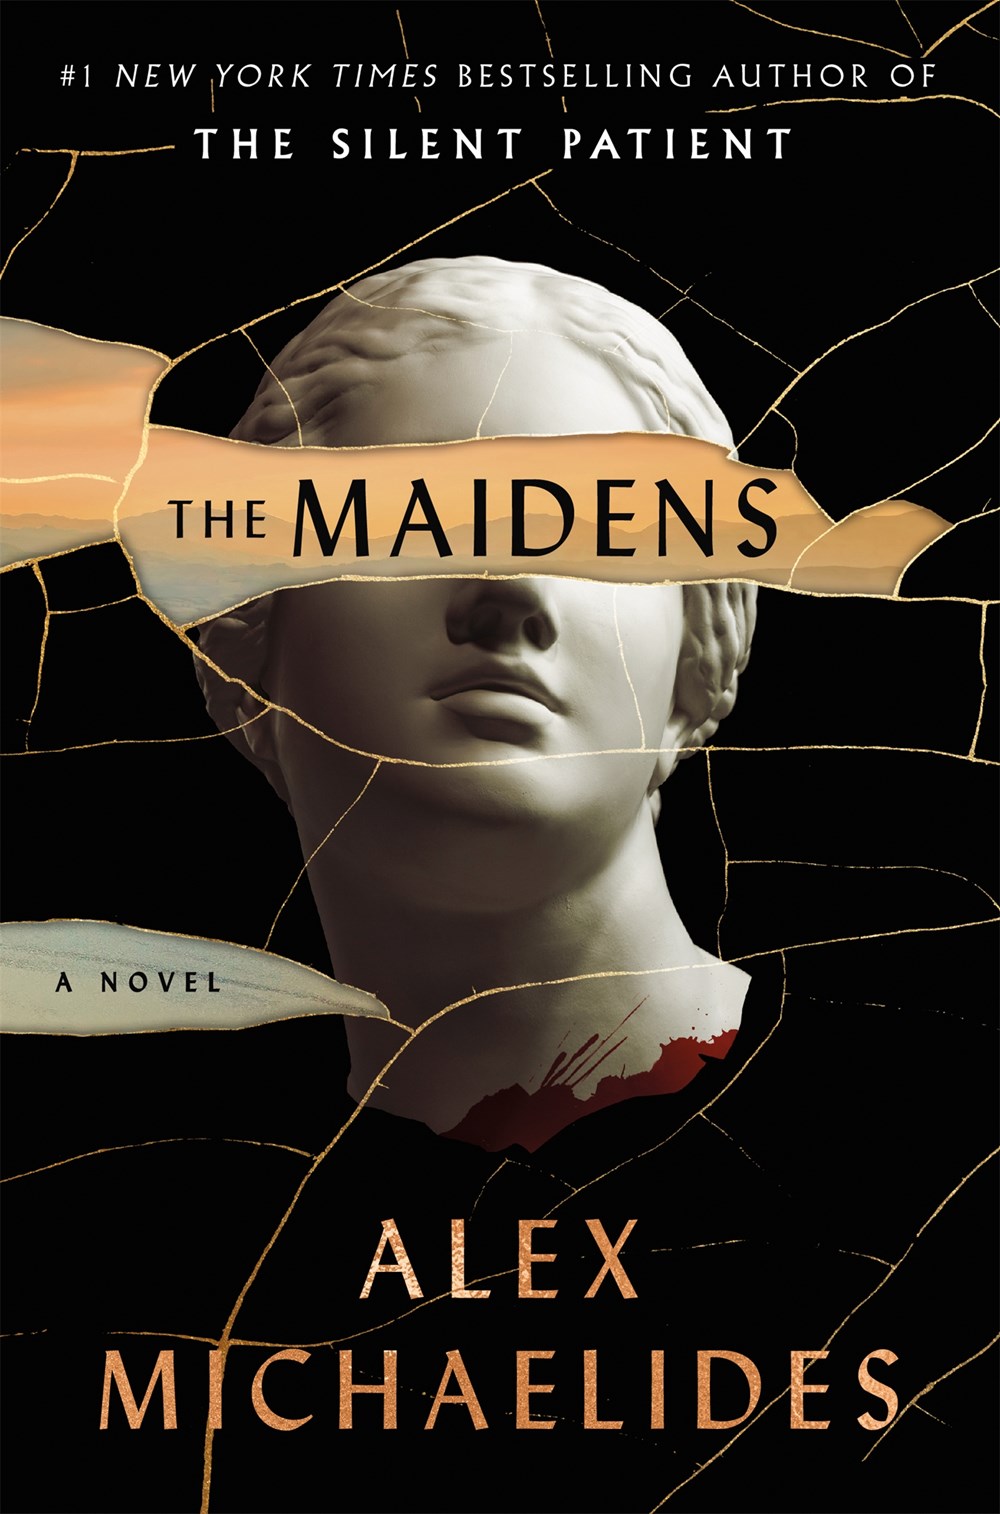 Read-Alikes for ‘The Maidens’ by Alex Michaelides | LibraryReads